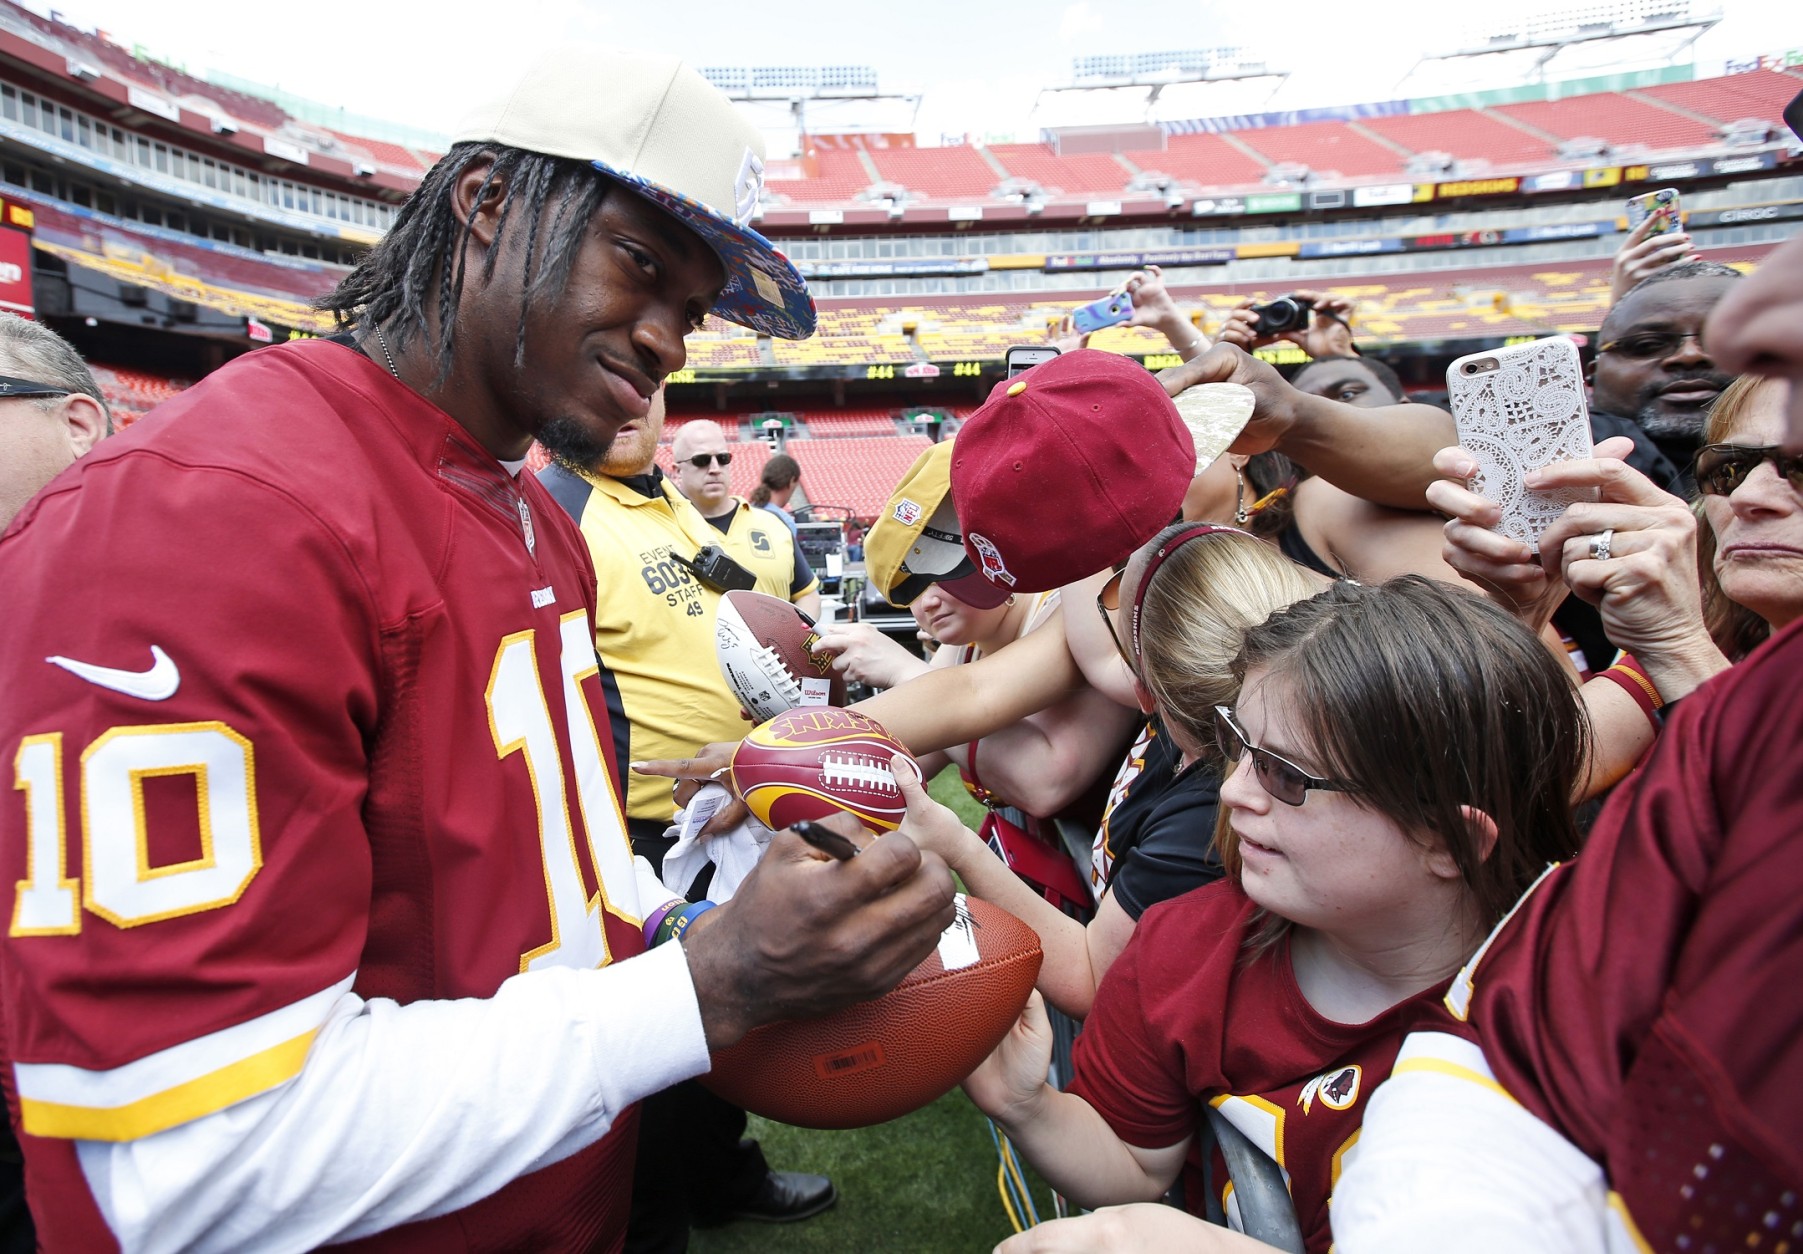 Washington Redskins quarterback Robert Griffin III, left, signs an autograph for a fan during an NFL football draft day fan fest Saturday, May 2, 2015, in Landover, Md. (AP Photo/Alex Brandon)